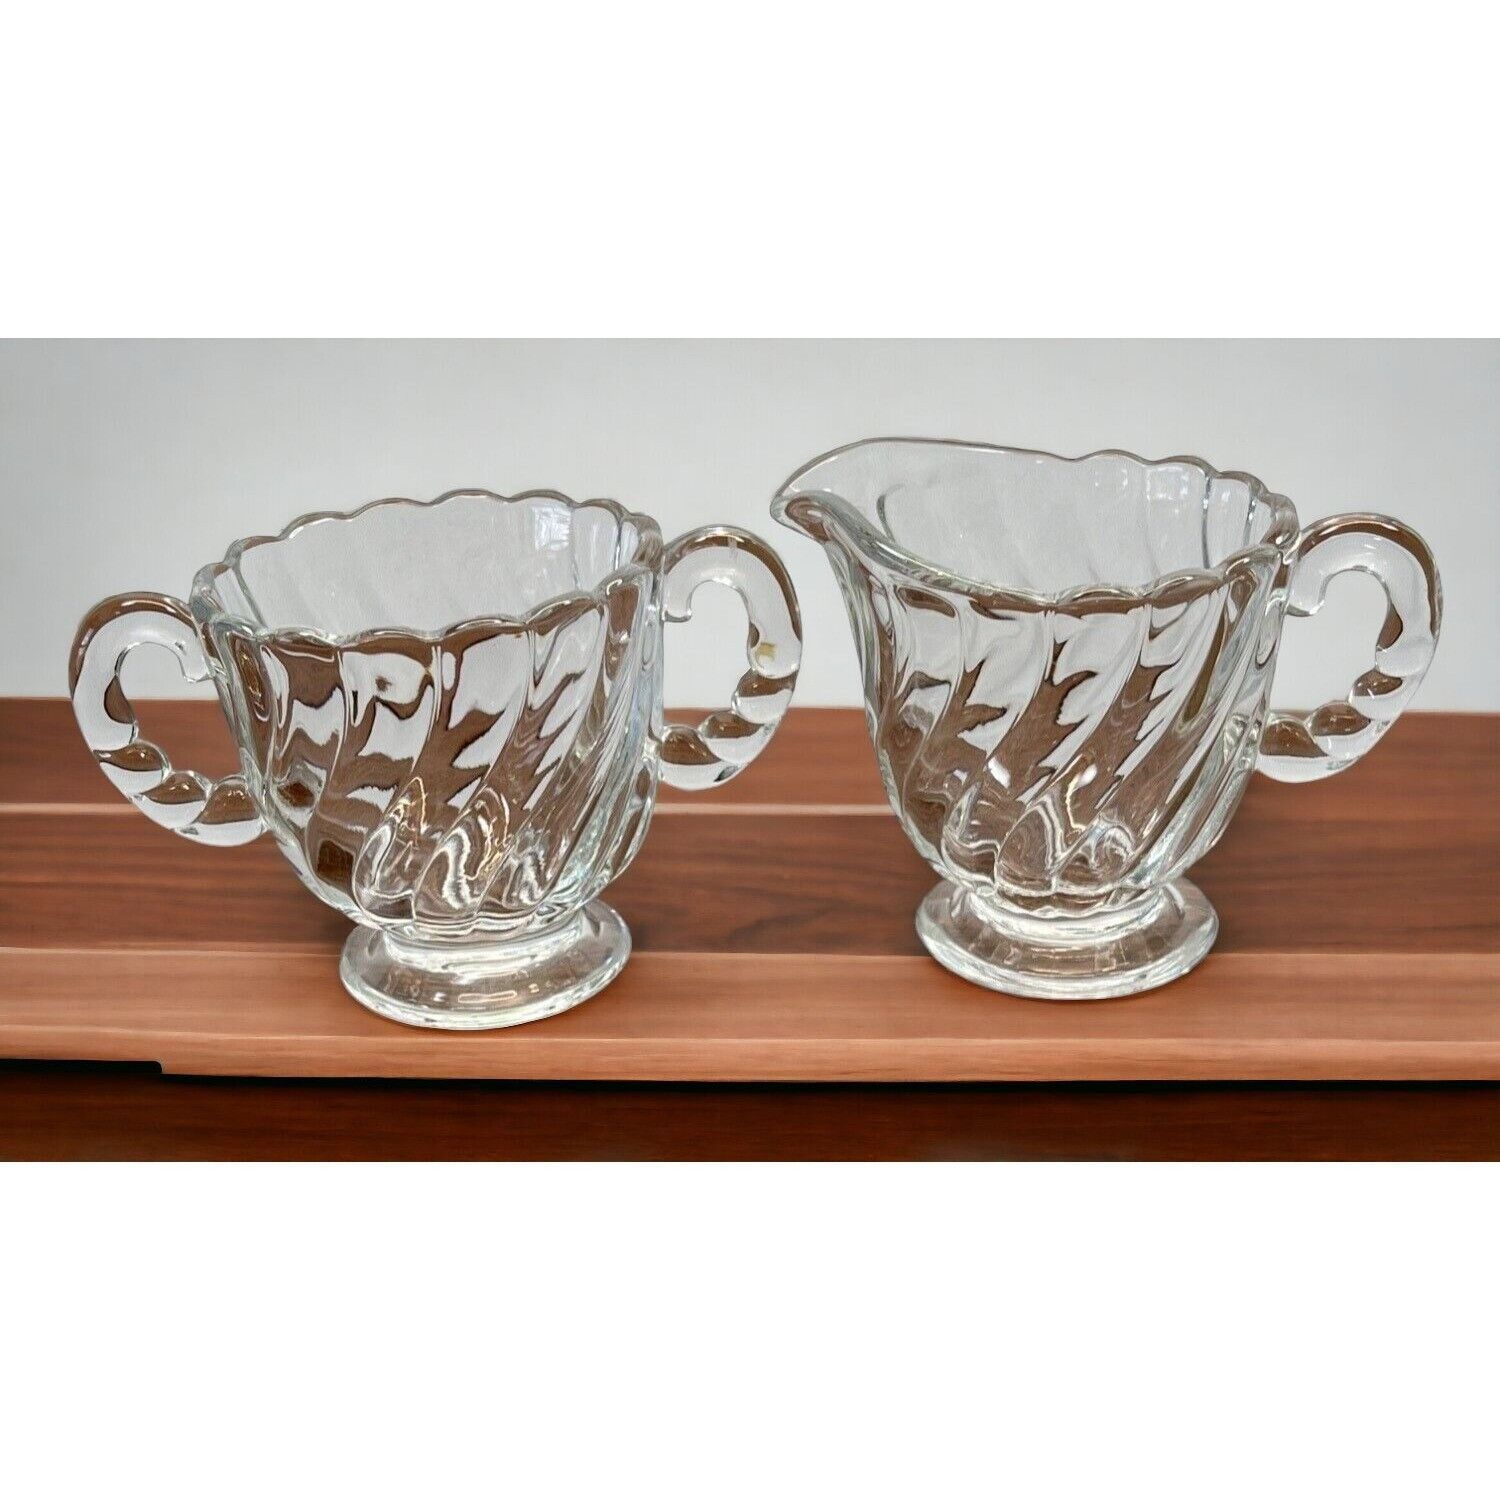 Primary image for Fostoria Glass Colony Optic Swirl Cream and Sugar Serving Set Vintage Clear